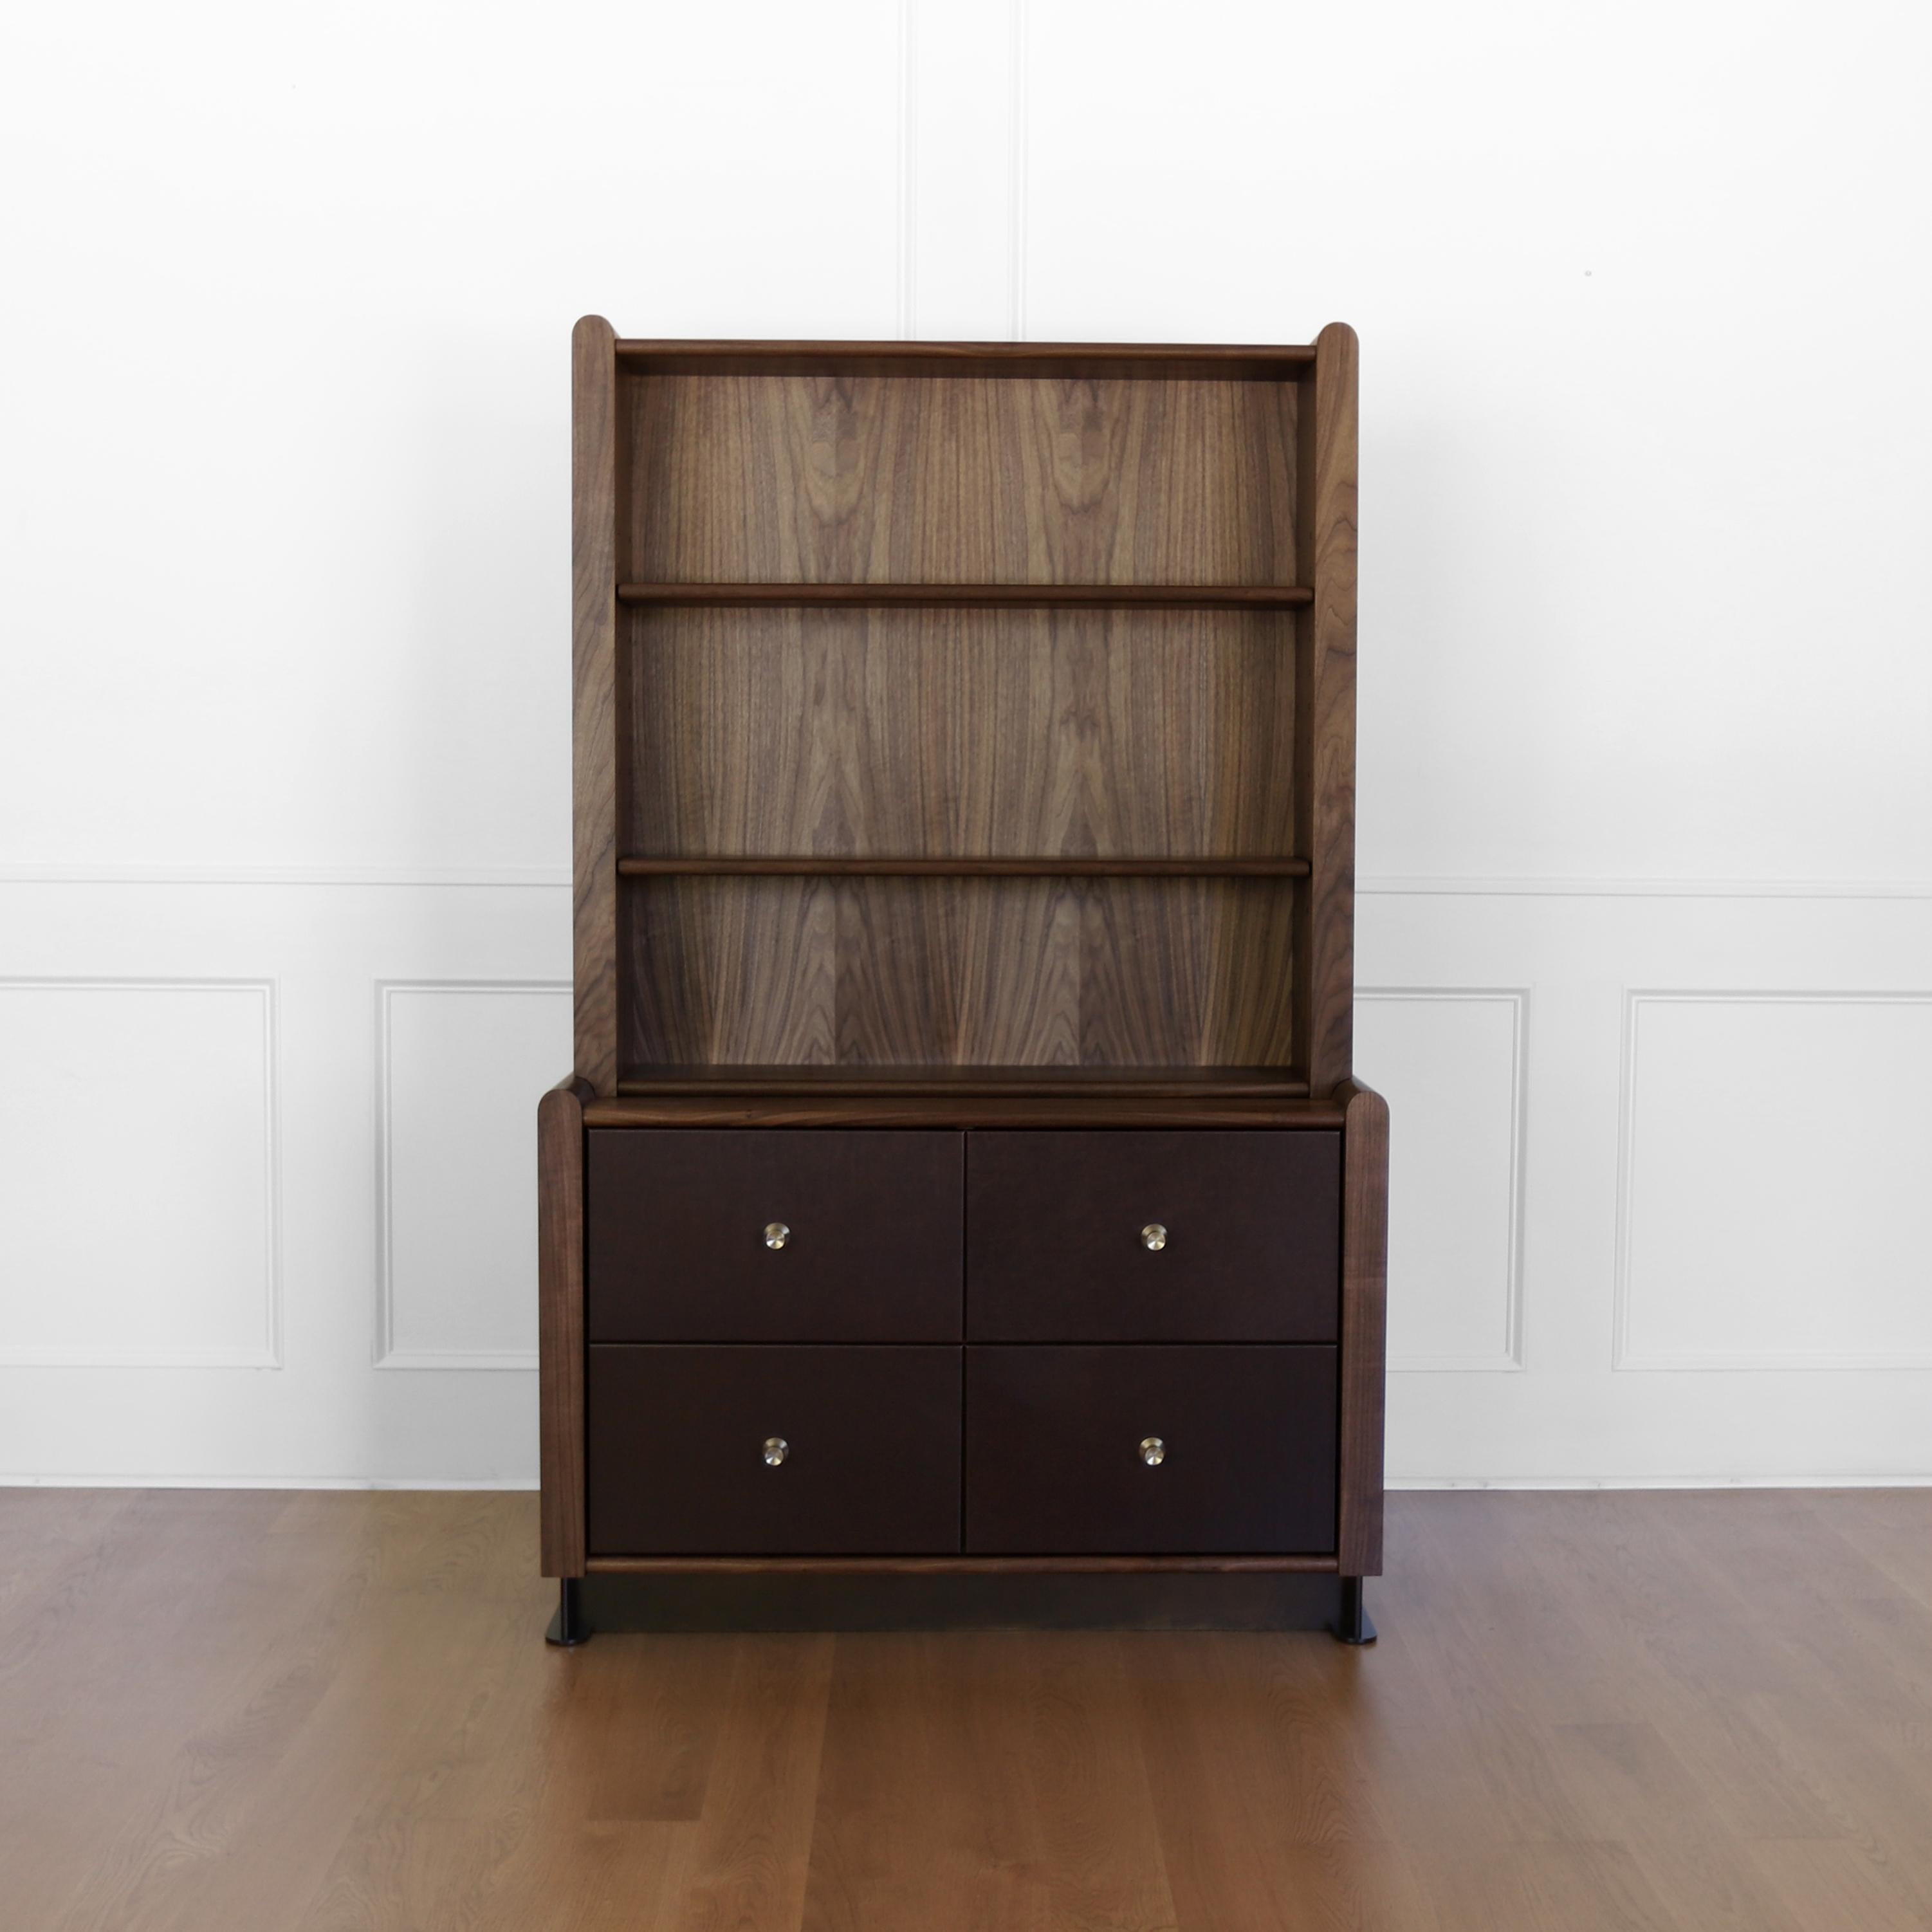 Alton Hutch / Bookcase by Crump and Kwash 

Featuring a solid walnut case / adjustable walnut shelves / oiled finish / leather wrapped drawer fronts / premium, full extension, soft close drawer slides / solid maple, dovetailed drawer boxes /